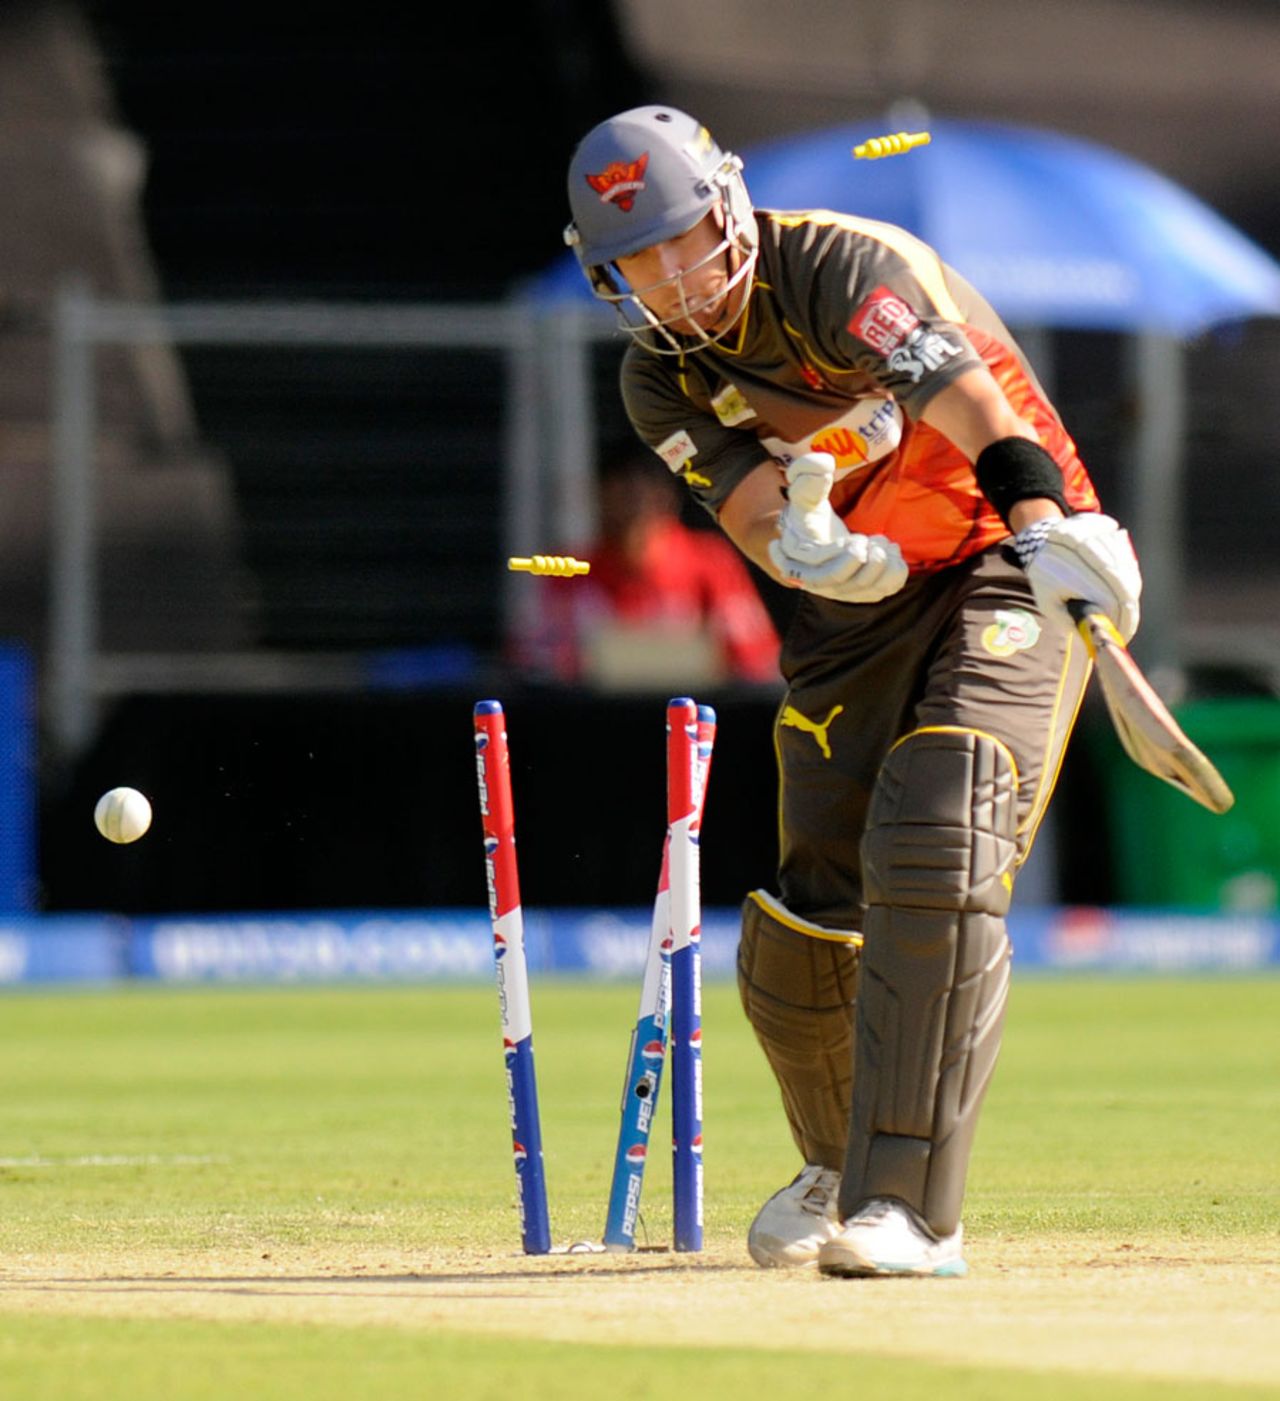 Cameron White is bowled by an inswinging delivery, Pune Warriors v Sunrisers Hyderabad, IPL, Pune, April 17, 2013